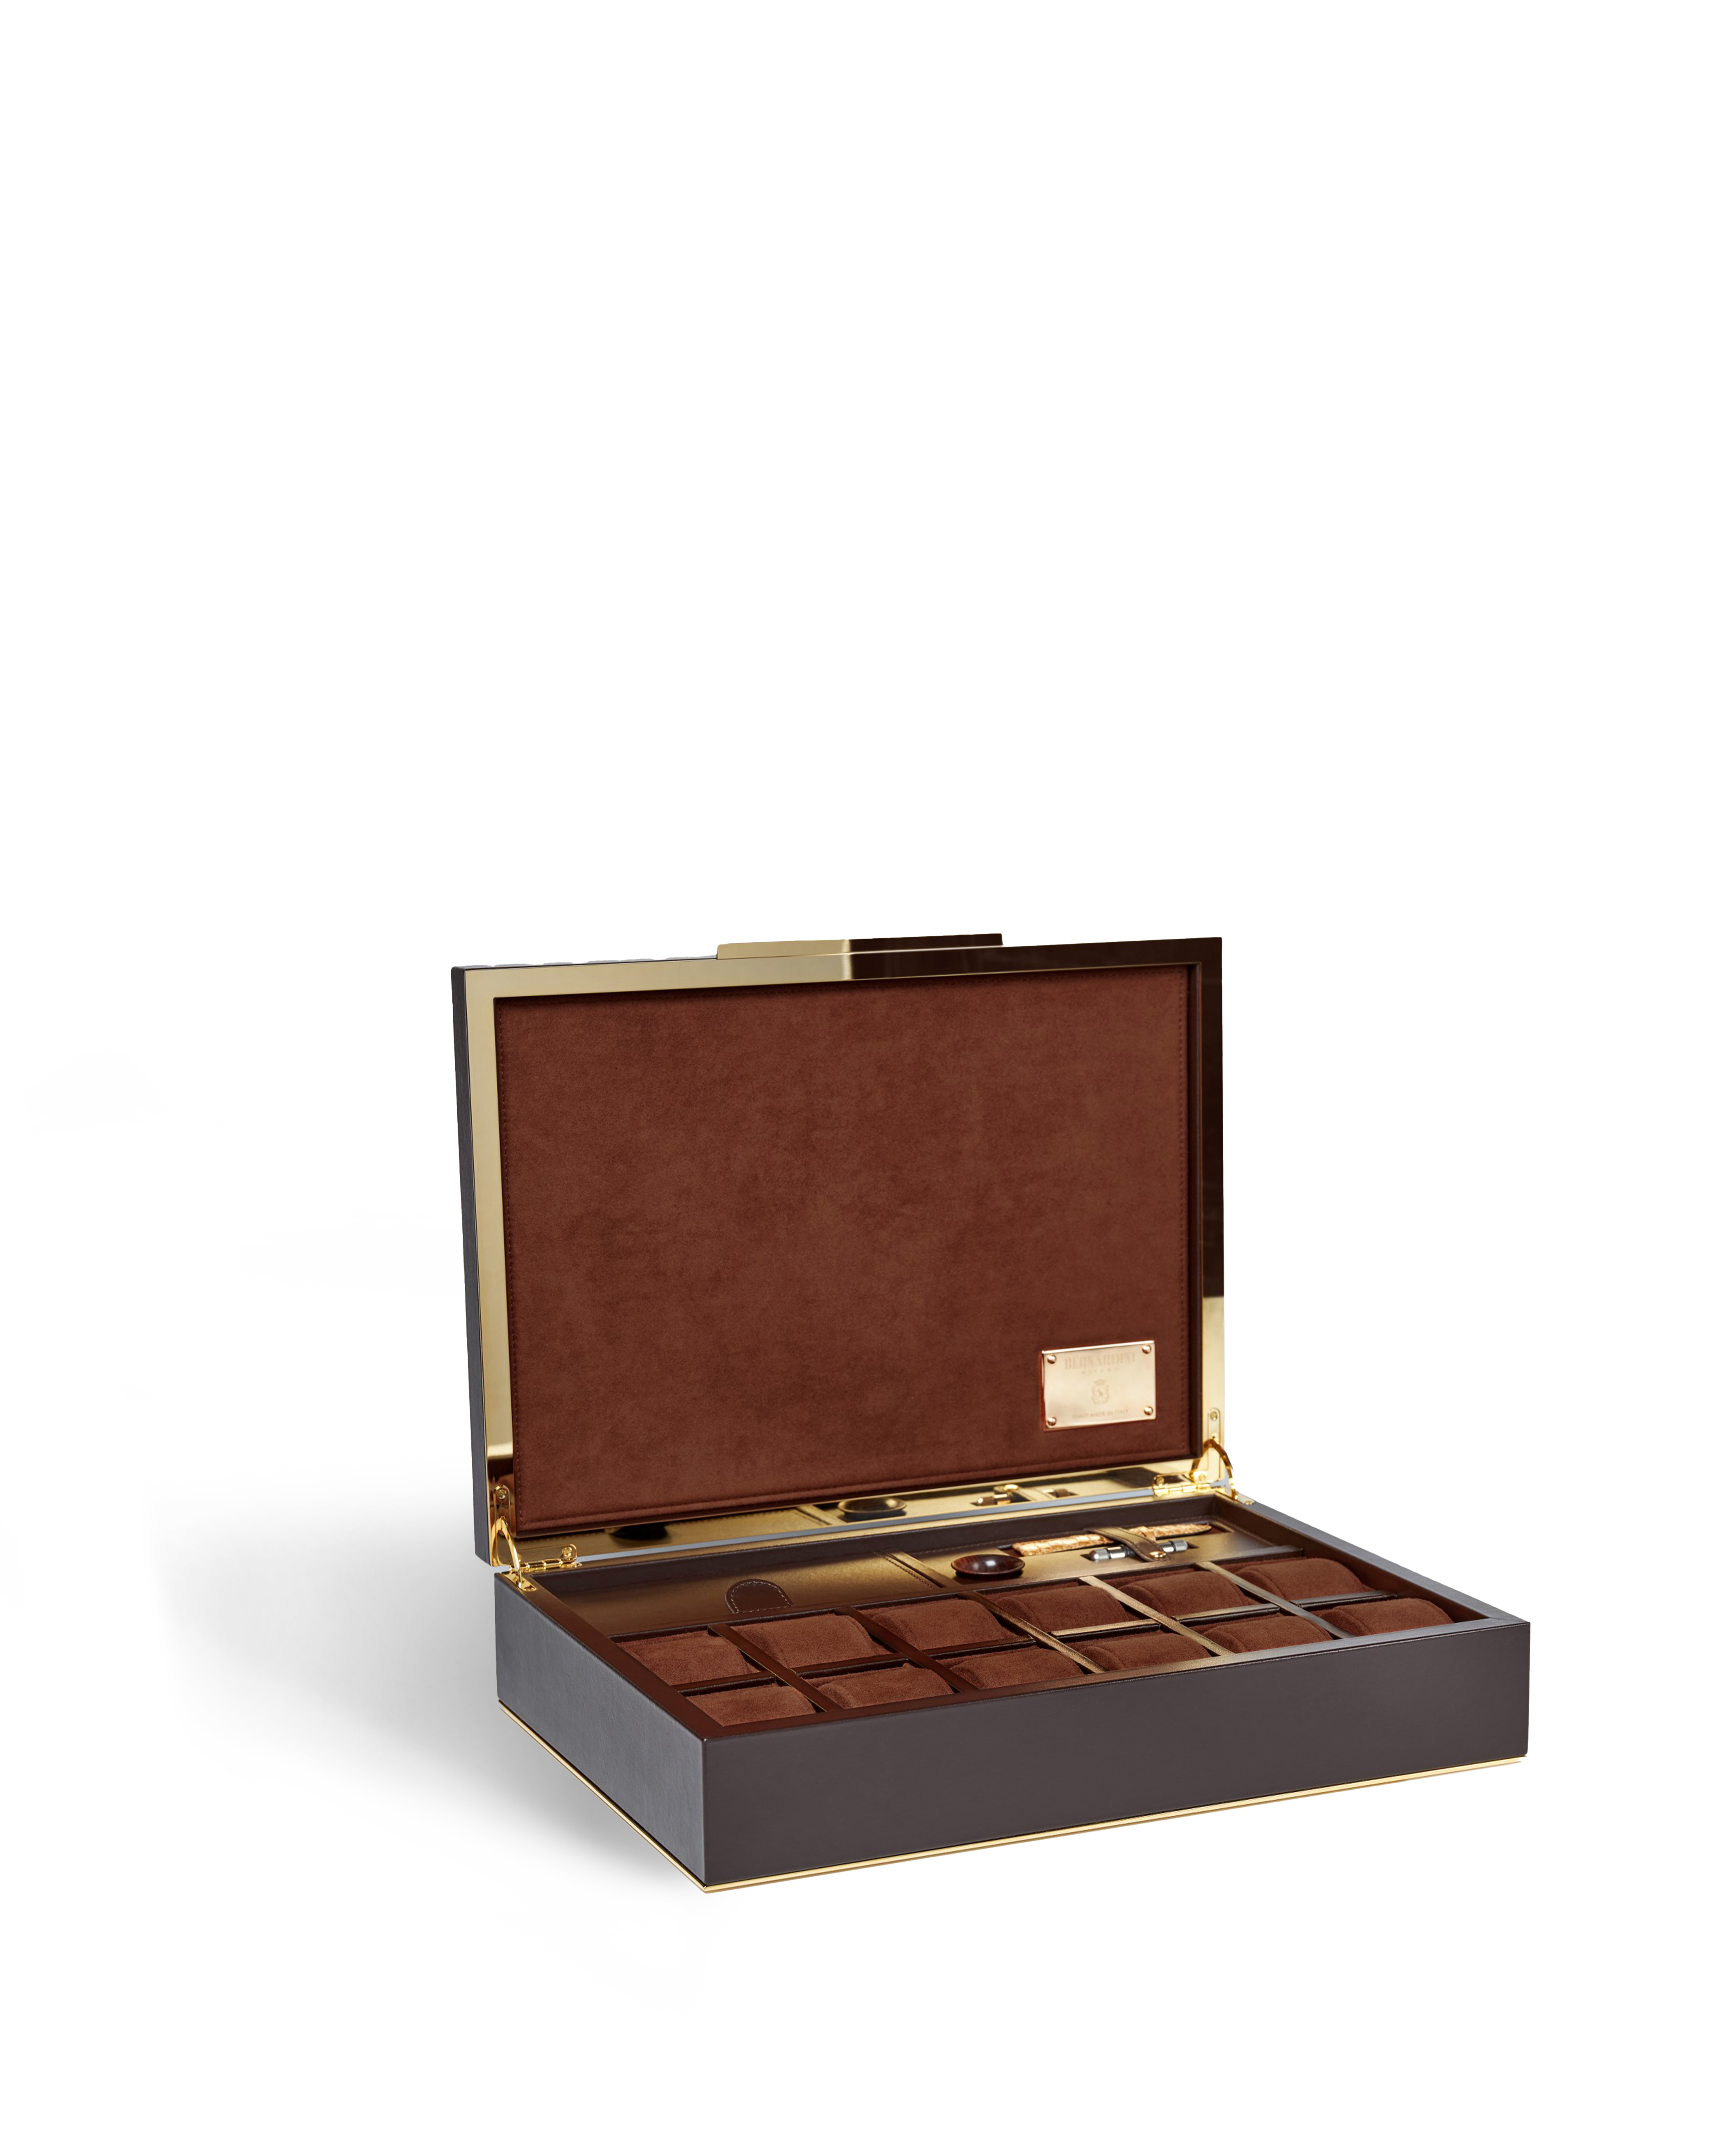 Bernardini Watch Holder - Deep Brown leather and Havana alcantare with yellow gold metal details